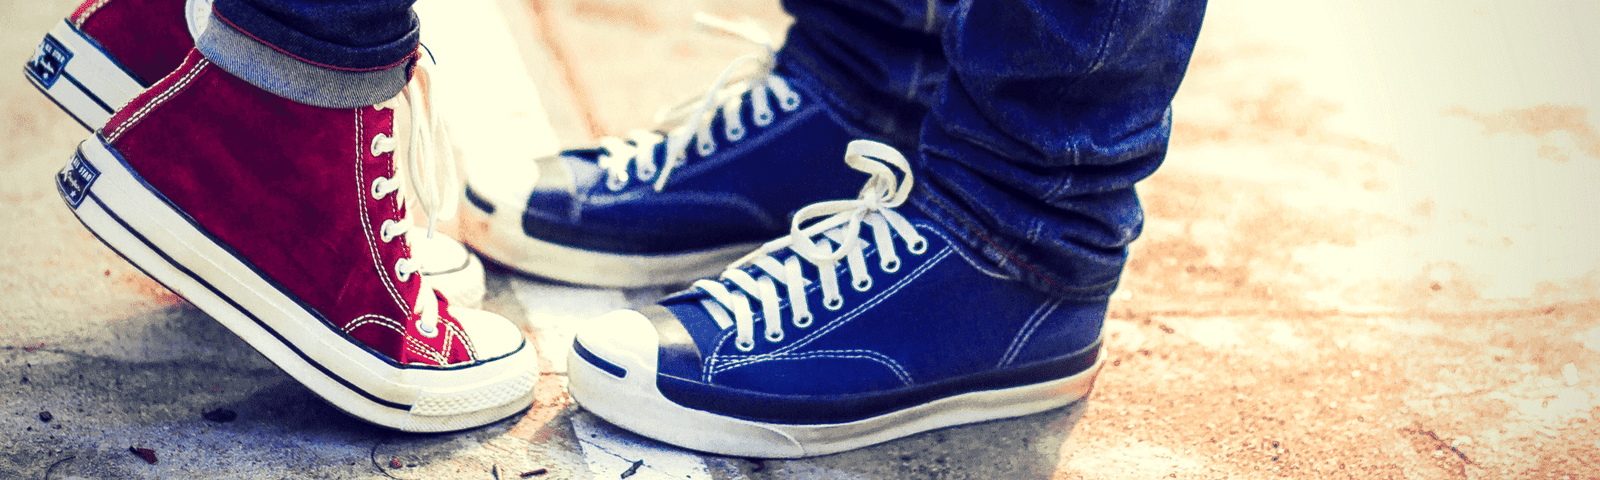 best converse shoes for lifting